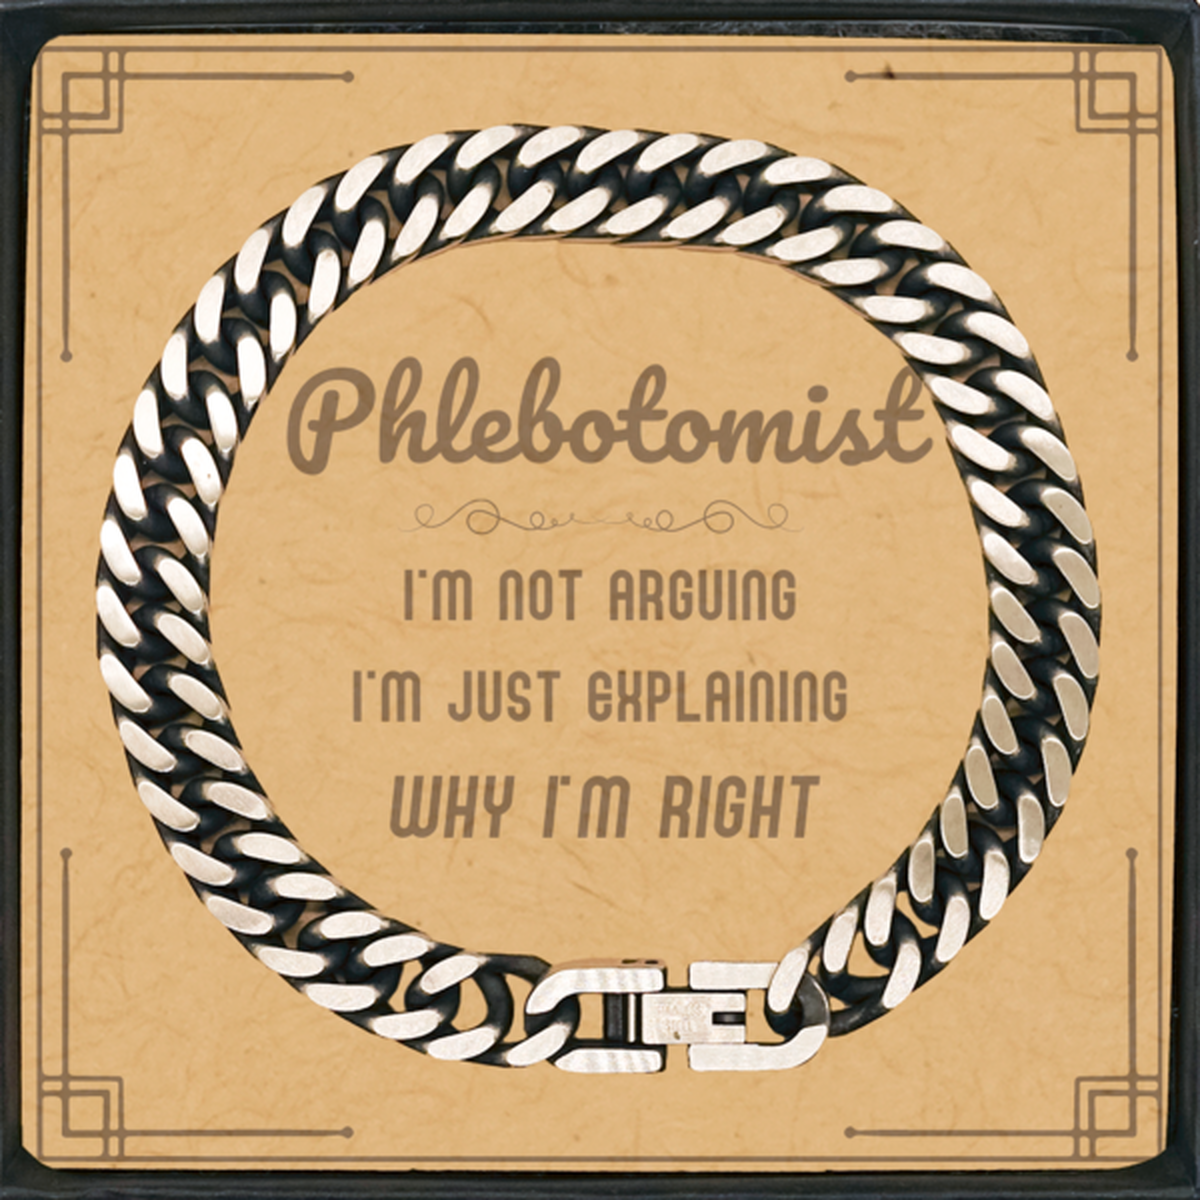 Phlebotomist I'm not Arguing. I'm Just Explaining Why I'm RIGHT Cuban Link Chain Bracelet, Funny Saying Quote Phlebotomist Gifts For Phlebotomist Message Card Graduation Birthday Christmas Gifts for Men Women Coworker